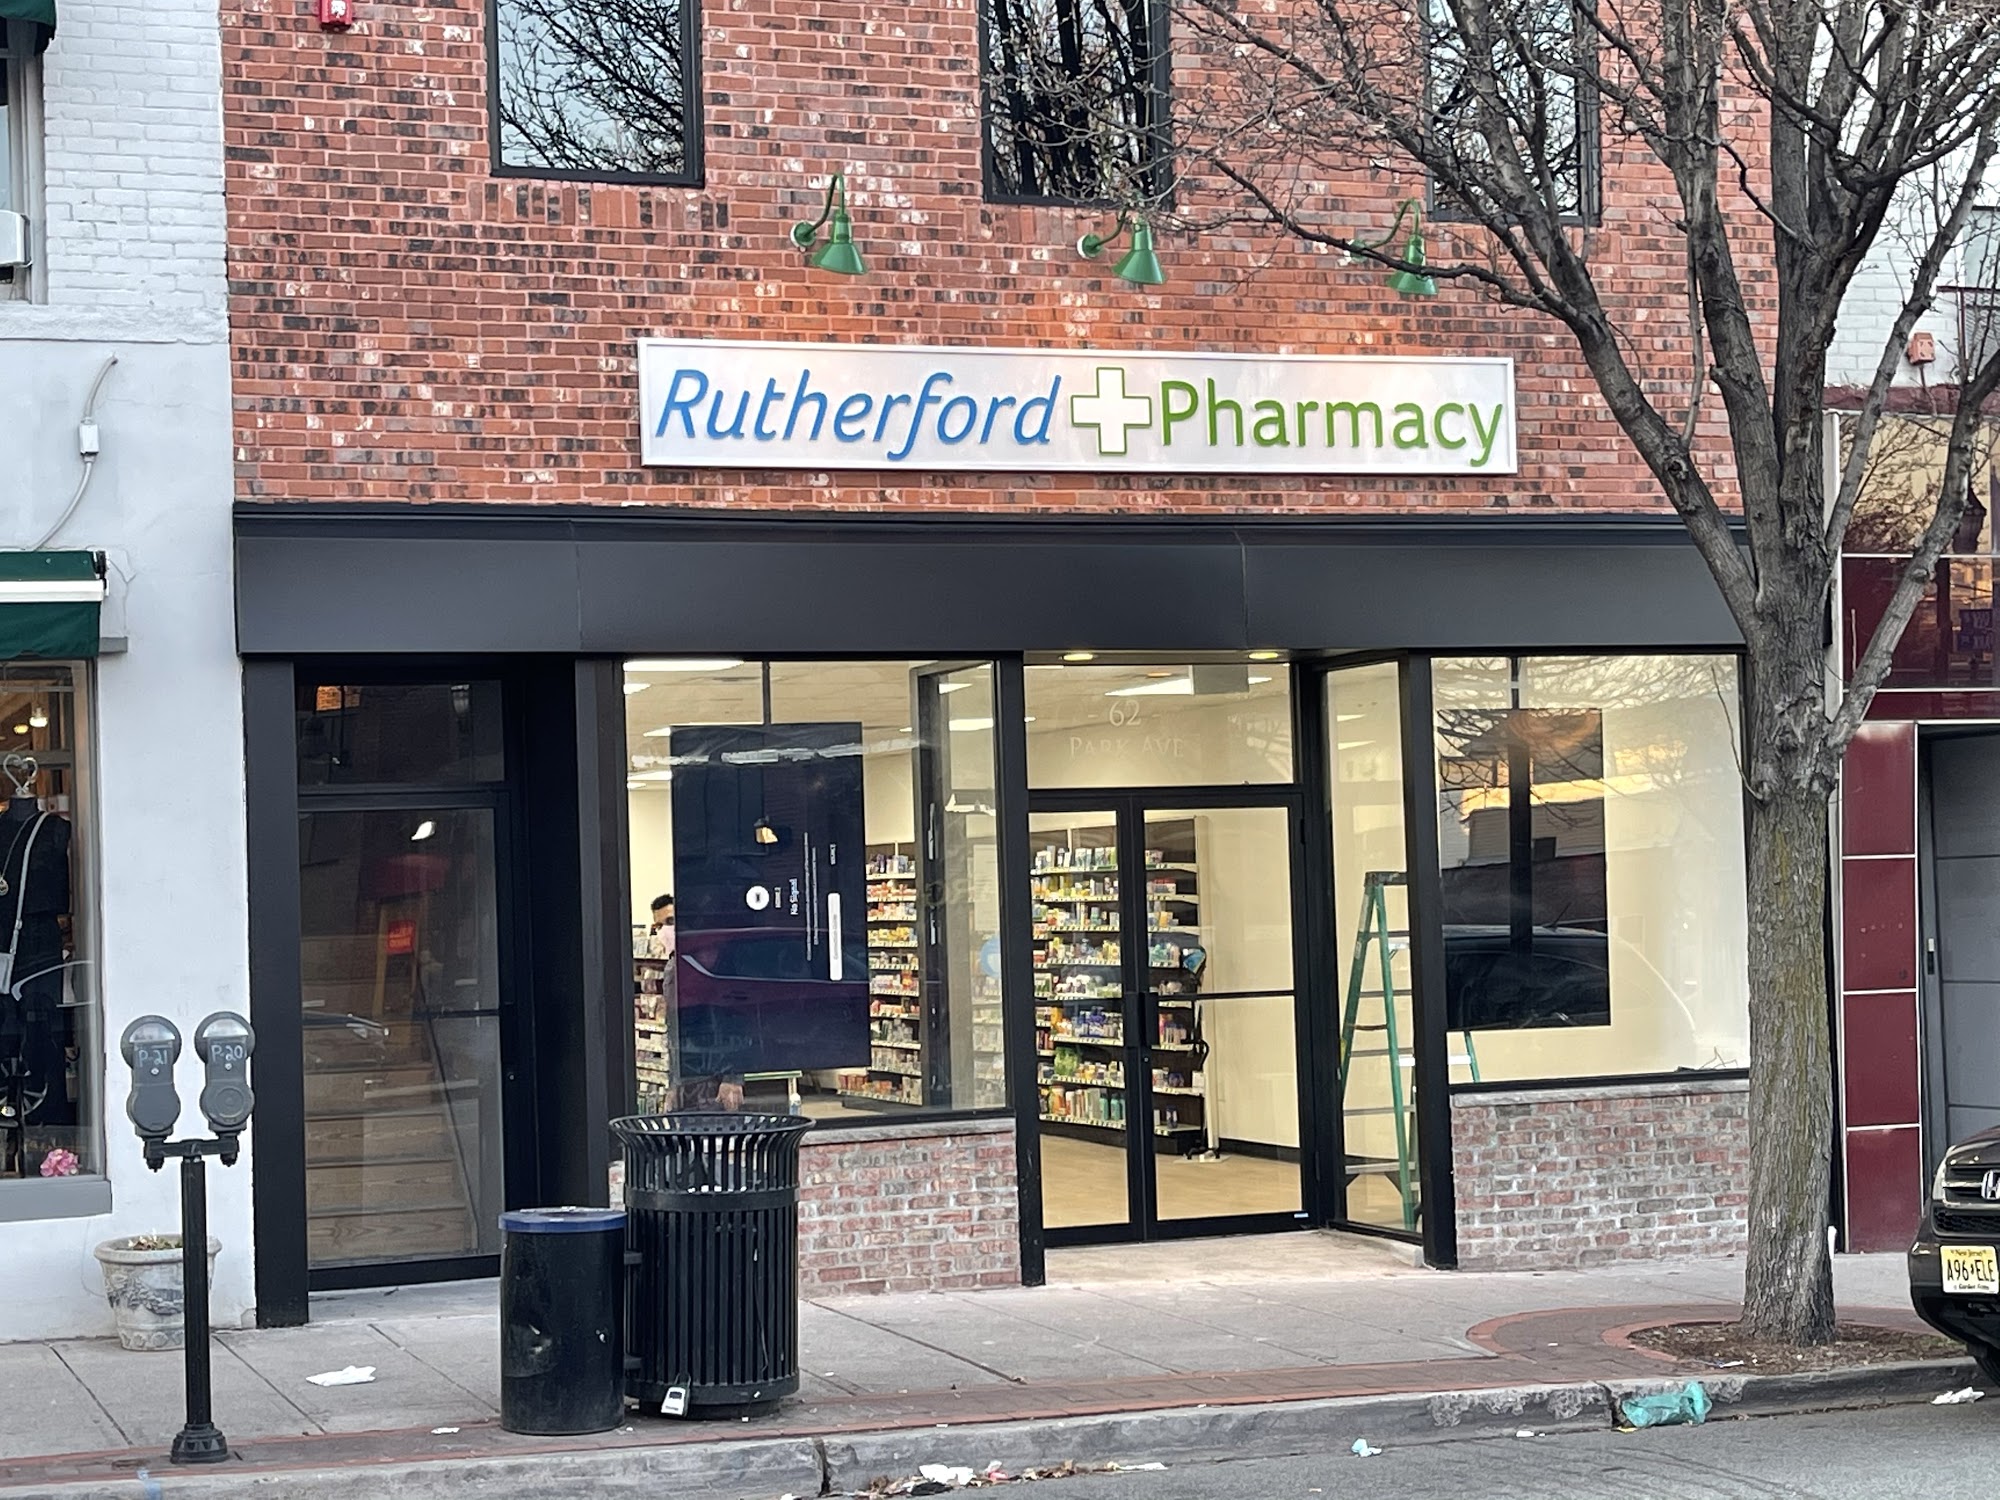 Rutherford Pharmacy